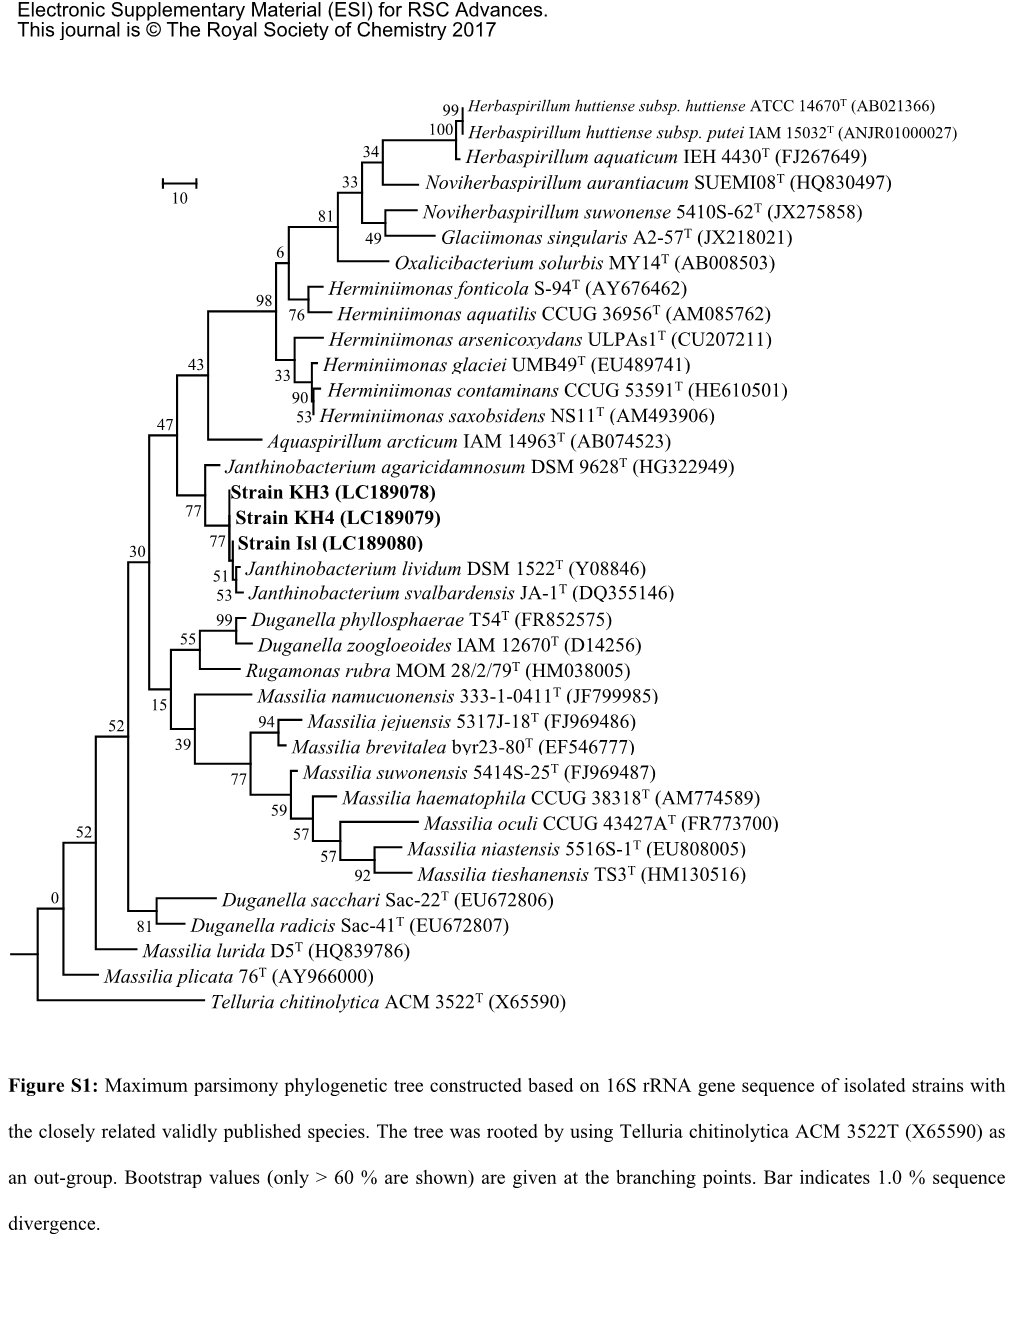 Maximum Parsimony Phylogenetic Tree Constructed Based on 16S Rrna Gene Sequence of Isolated Strains with the Closely Related Validly Published Species